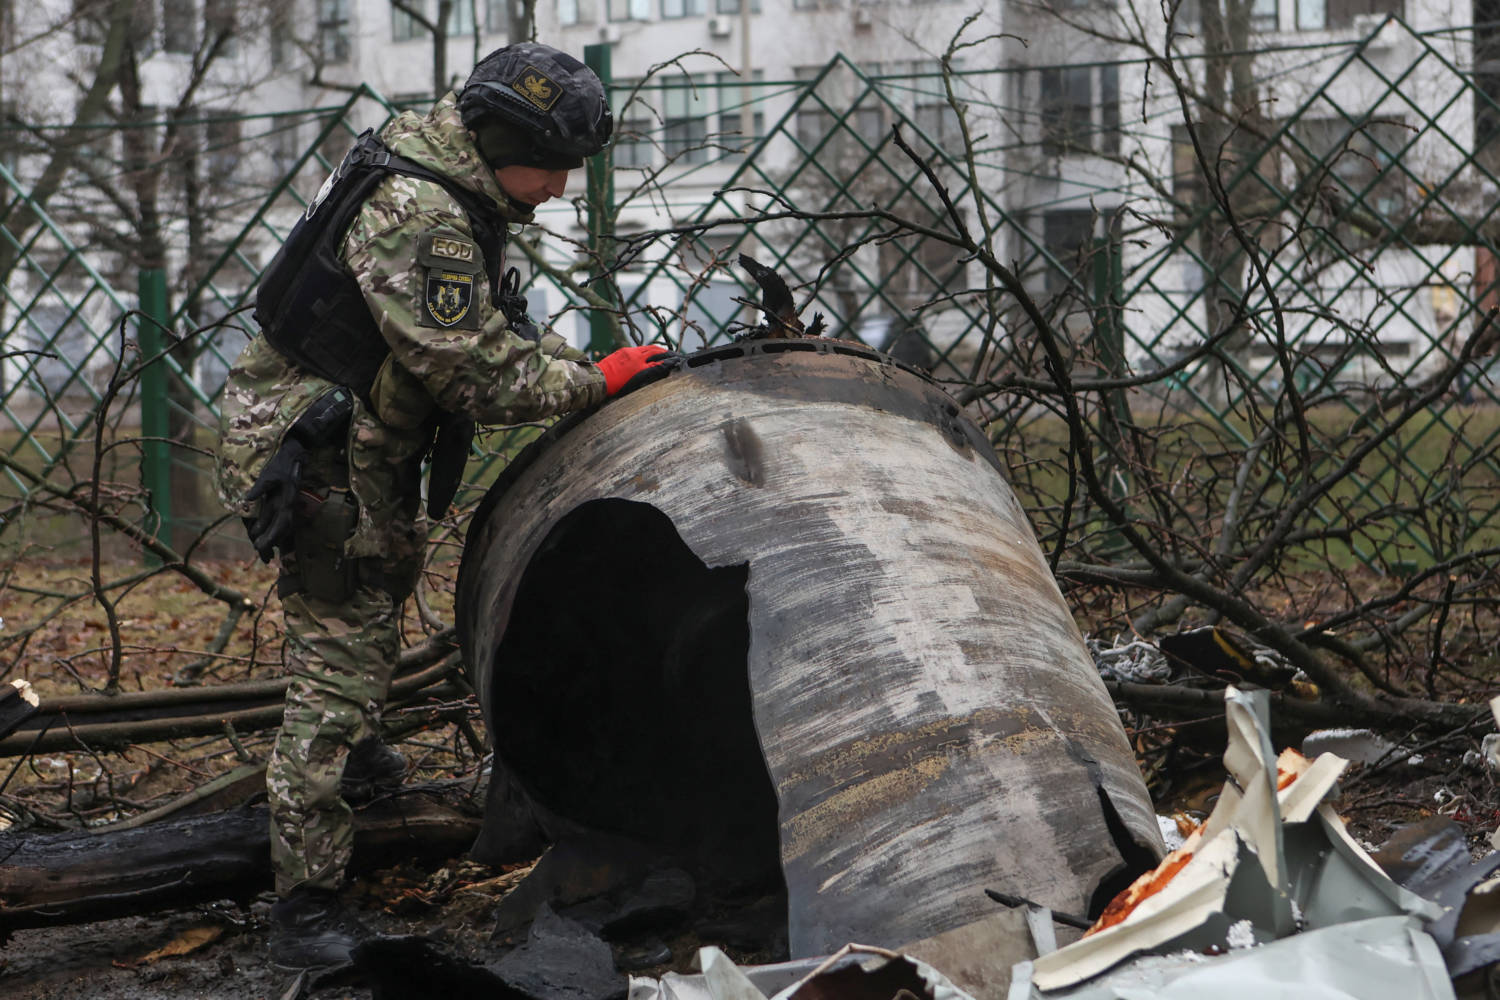 A Bomb Squad Member Works Next To Remains Of An Unidentified Missile At The Site Where Residential Buildings Were Heavily Damaged During A Russian Missile Attack In Kharkiv